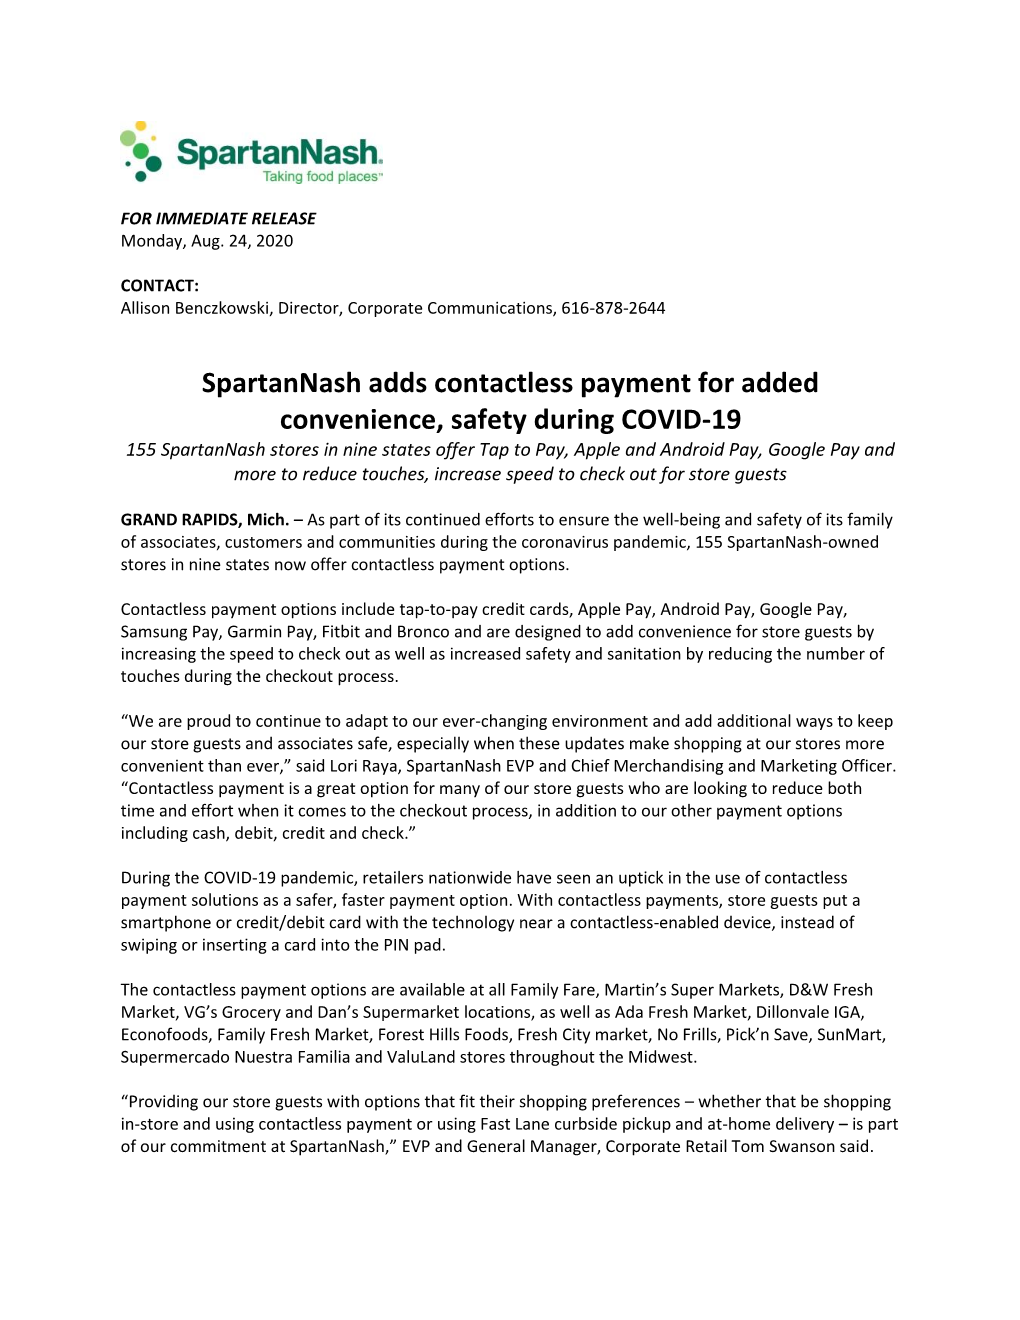 Spartannash Adds Contactless Payment for Added Convenience